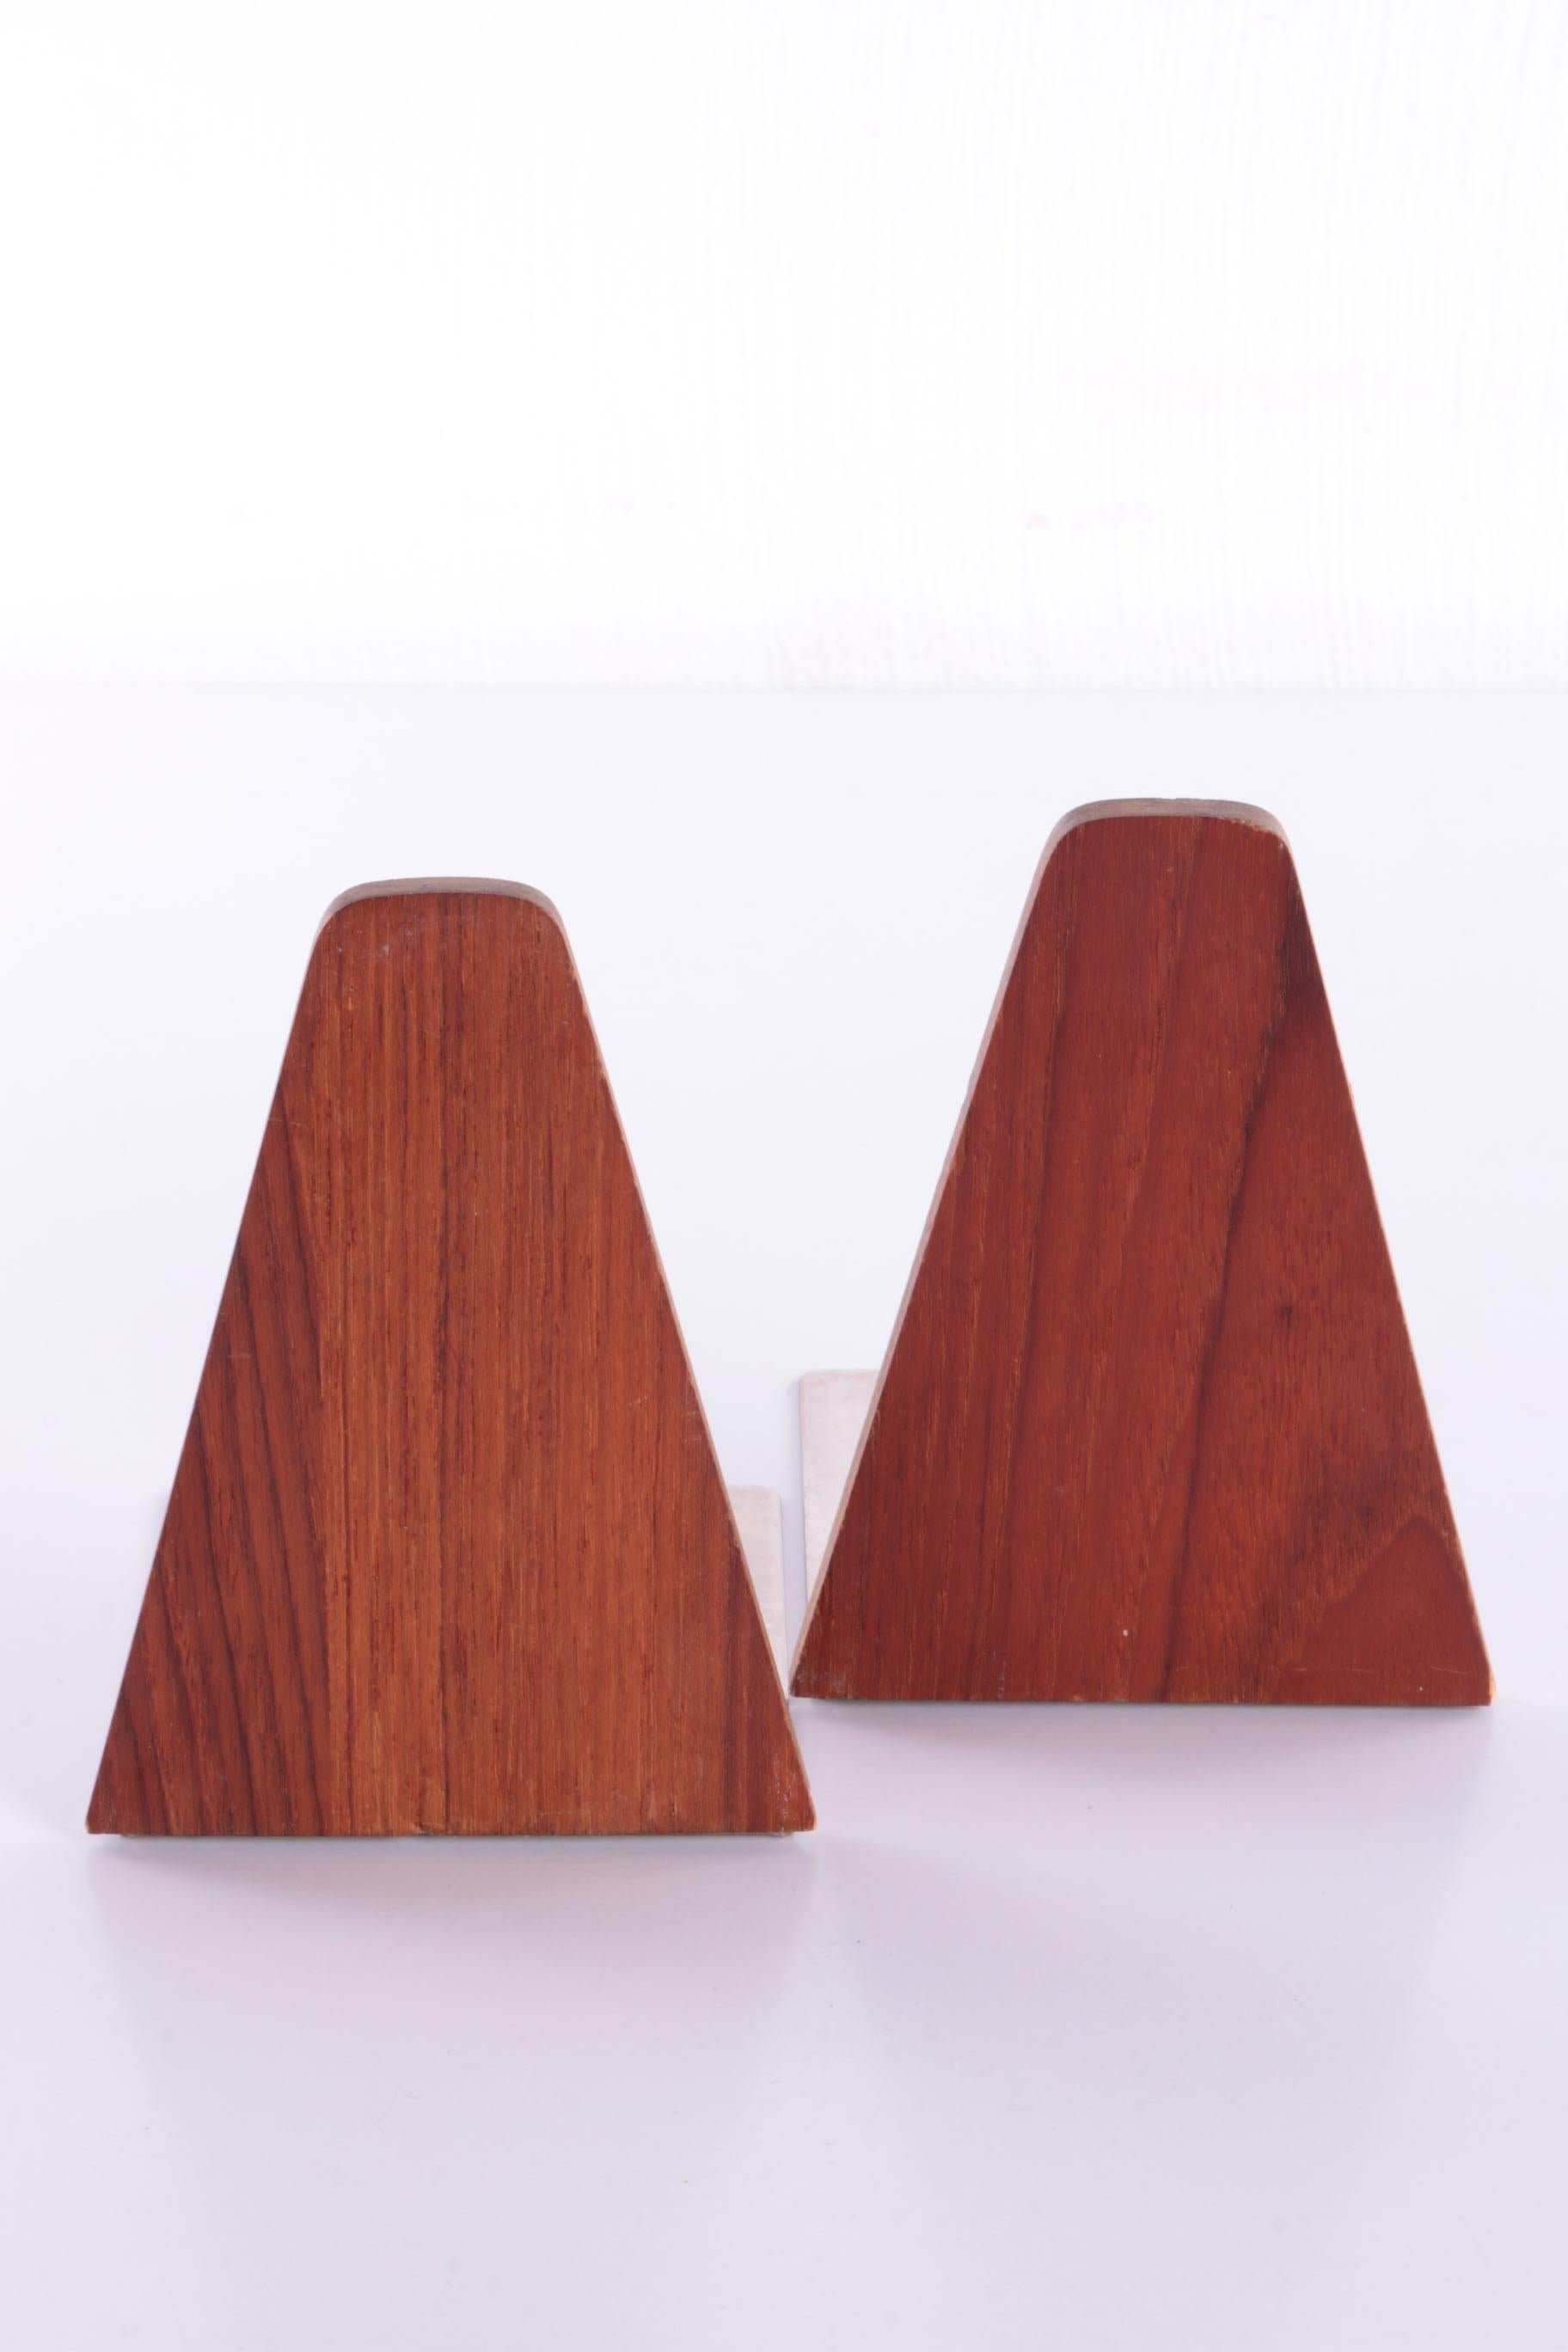 Kai Kristiansen set teak bookends Denmark

Mid-century small teak bookends attributed to Kai Kristiansen, manufactured in the 1960's by Feldballe Møbelfabrik in Denmark, made of solid teak with metal plate base.

In very good vintage condition